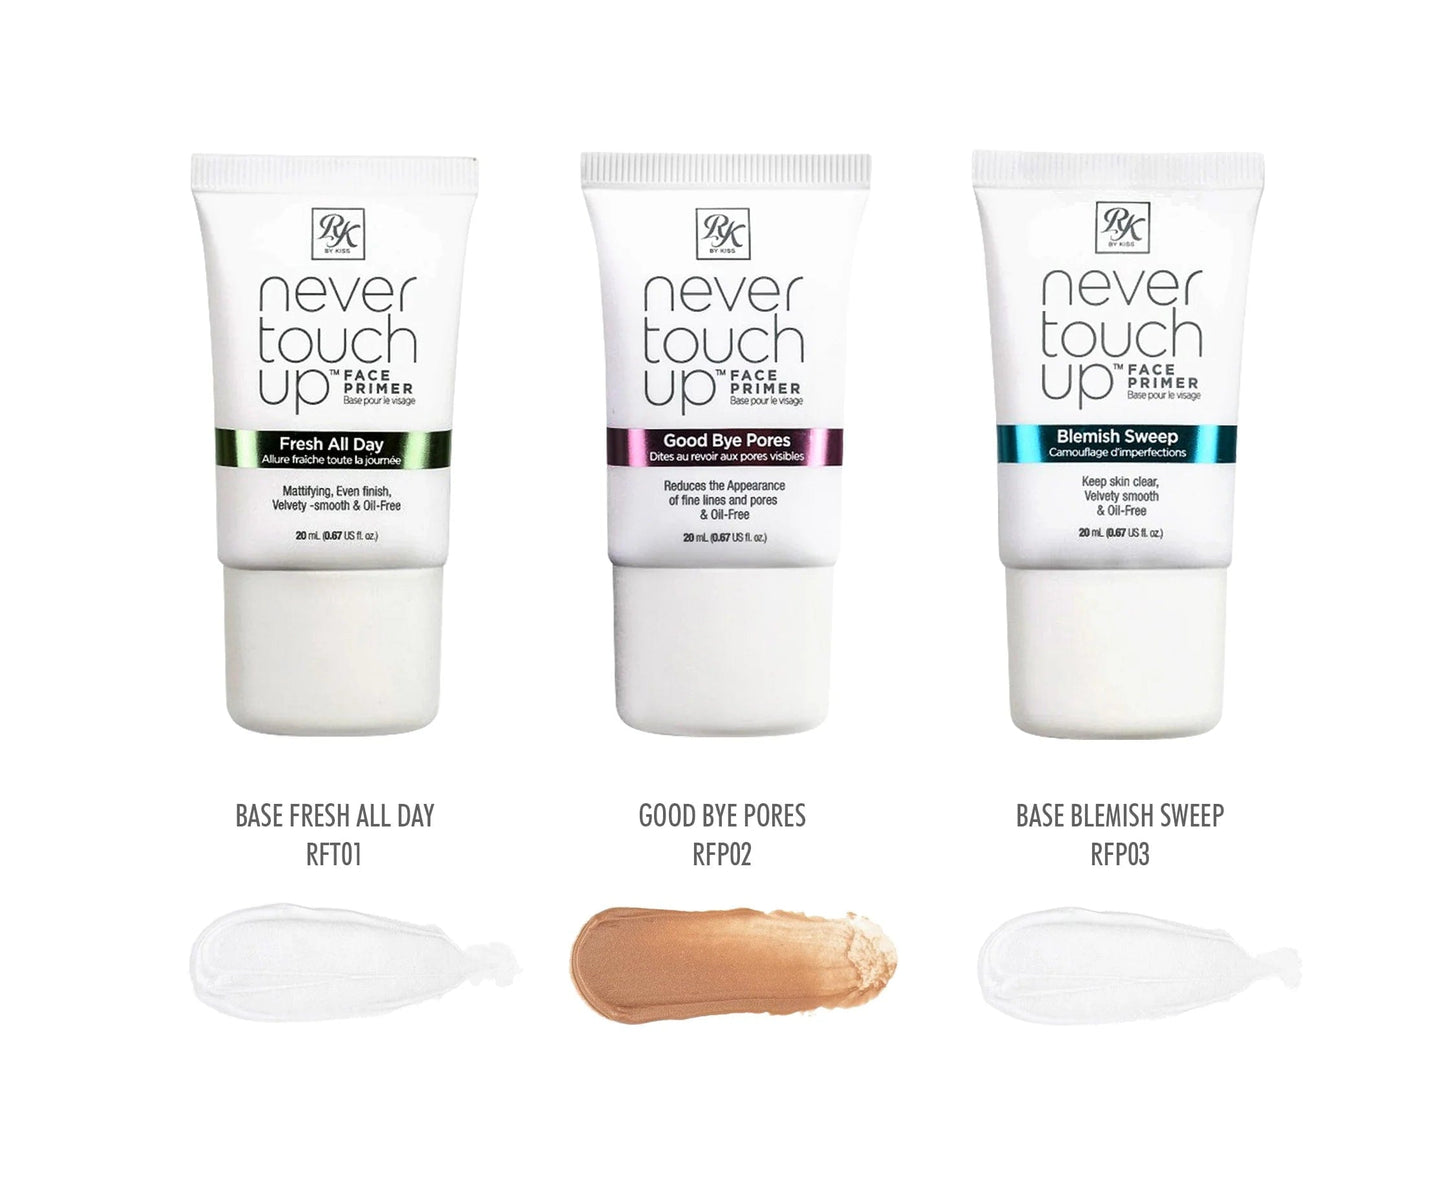 RFP NEVER TOUCH UP PRIMER